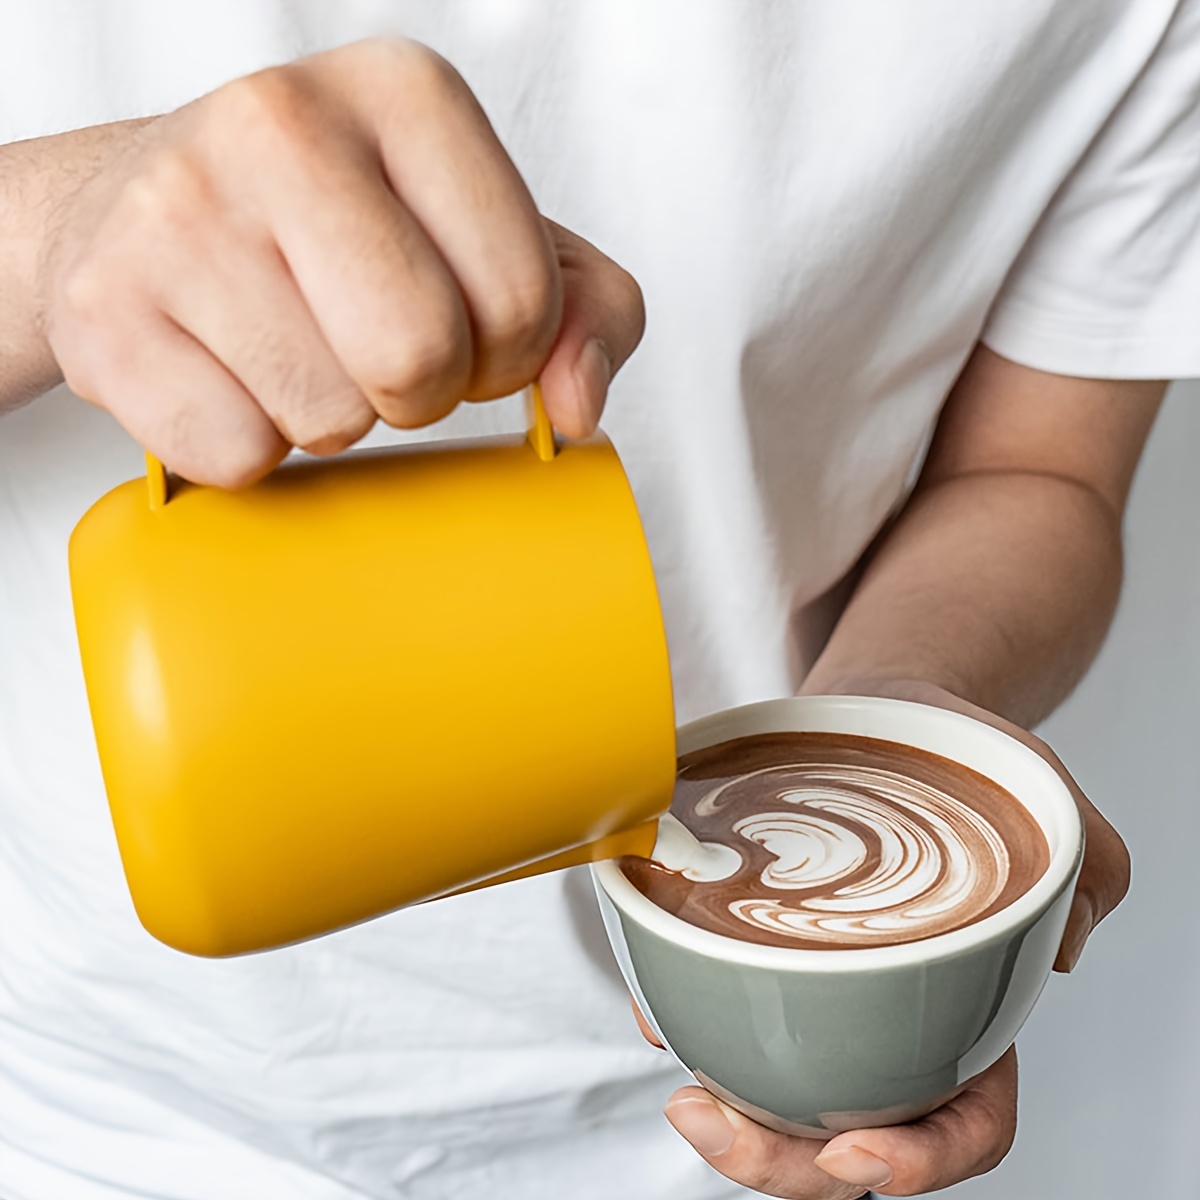 Stainless Steel Latte Art Pitcher Milk Frothing Jug Espresso Coffee Mug Barista Craft Coffee Cappuccino Cups Pot Tools